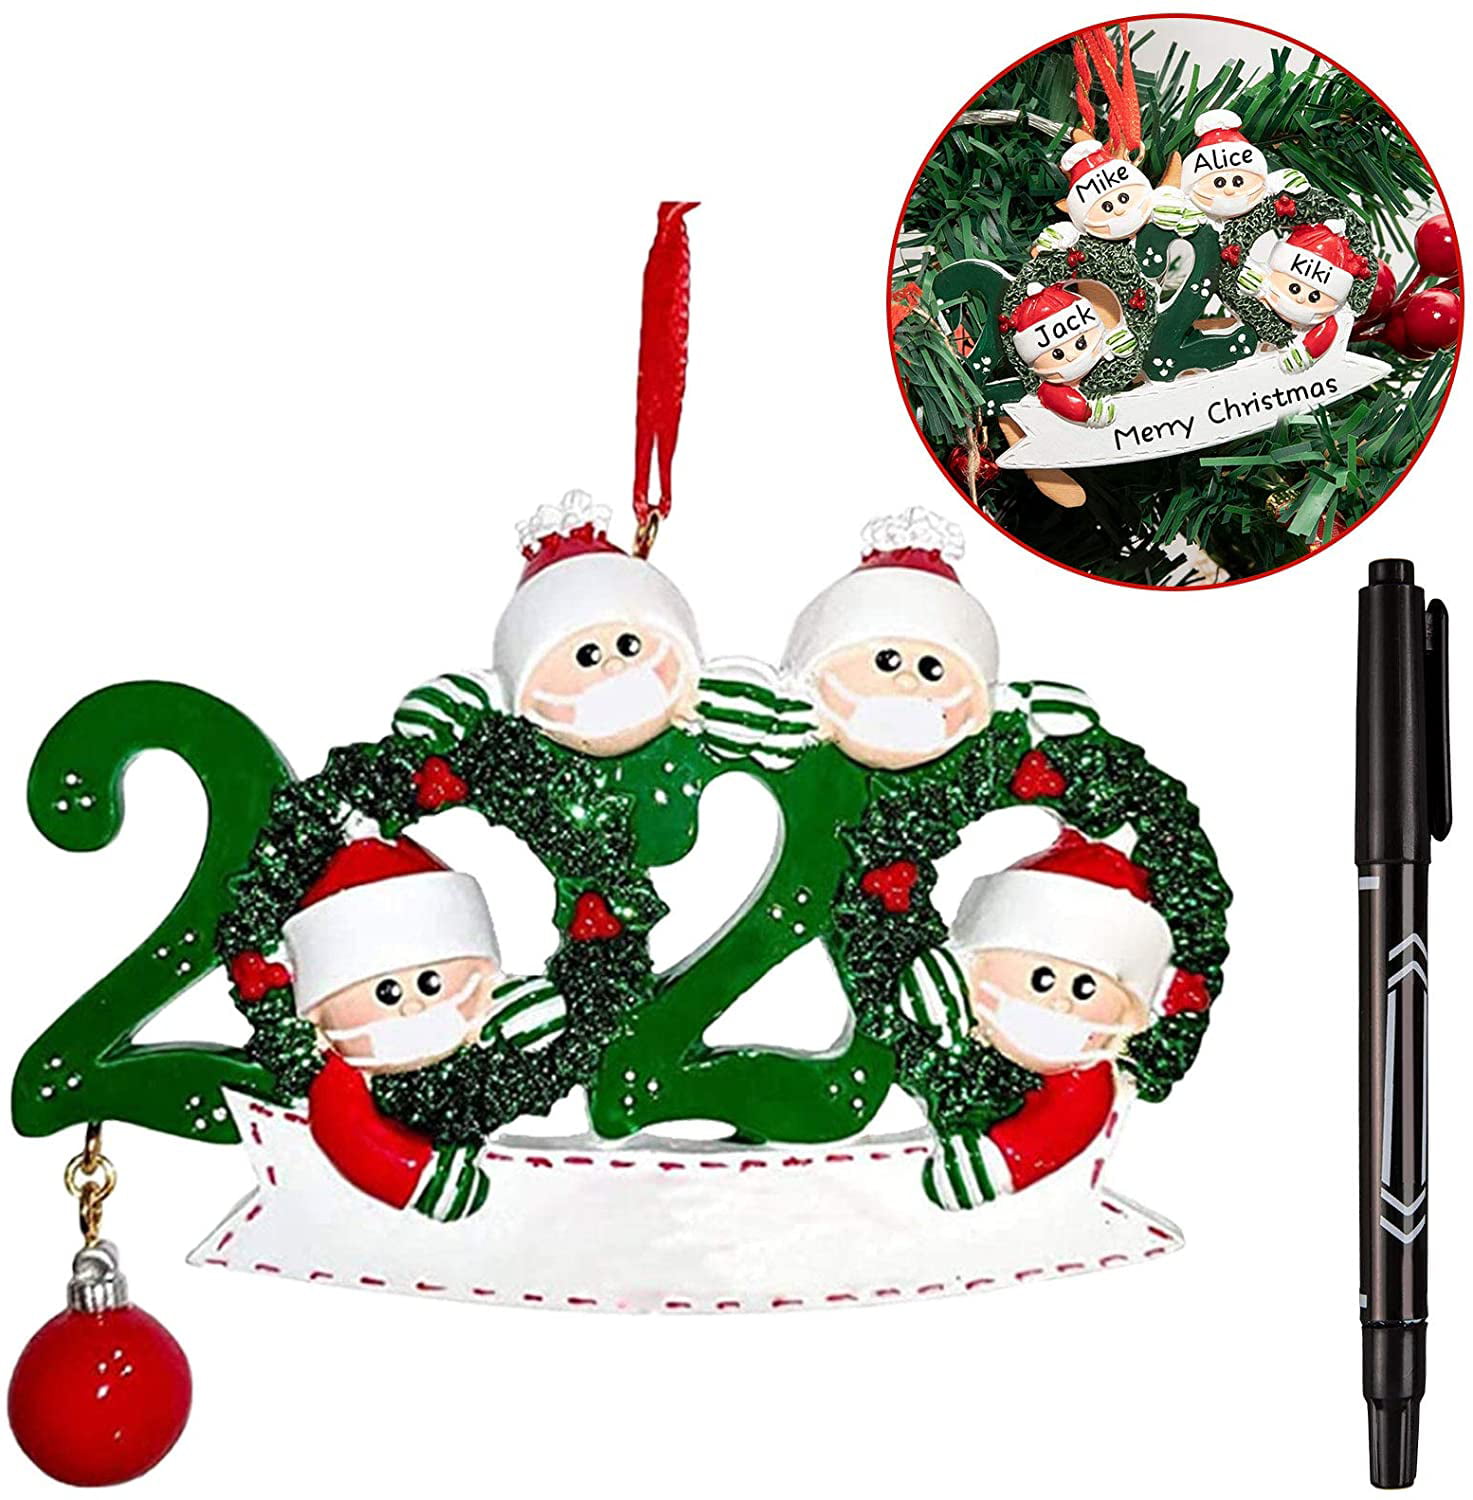 2020 Marry Christmas Hanging Ornaments Family Personalized Xmas Decor+1 Free Pen 